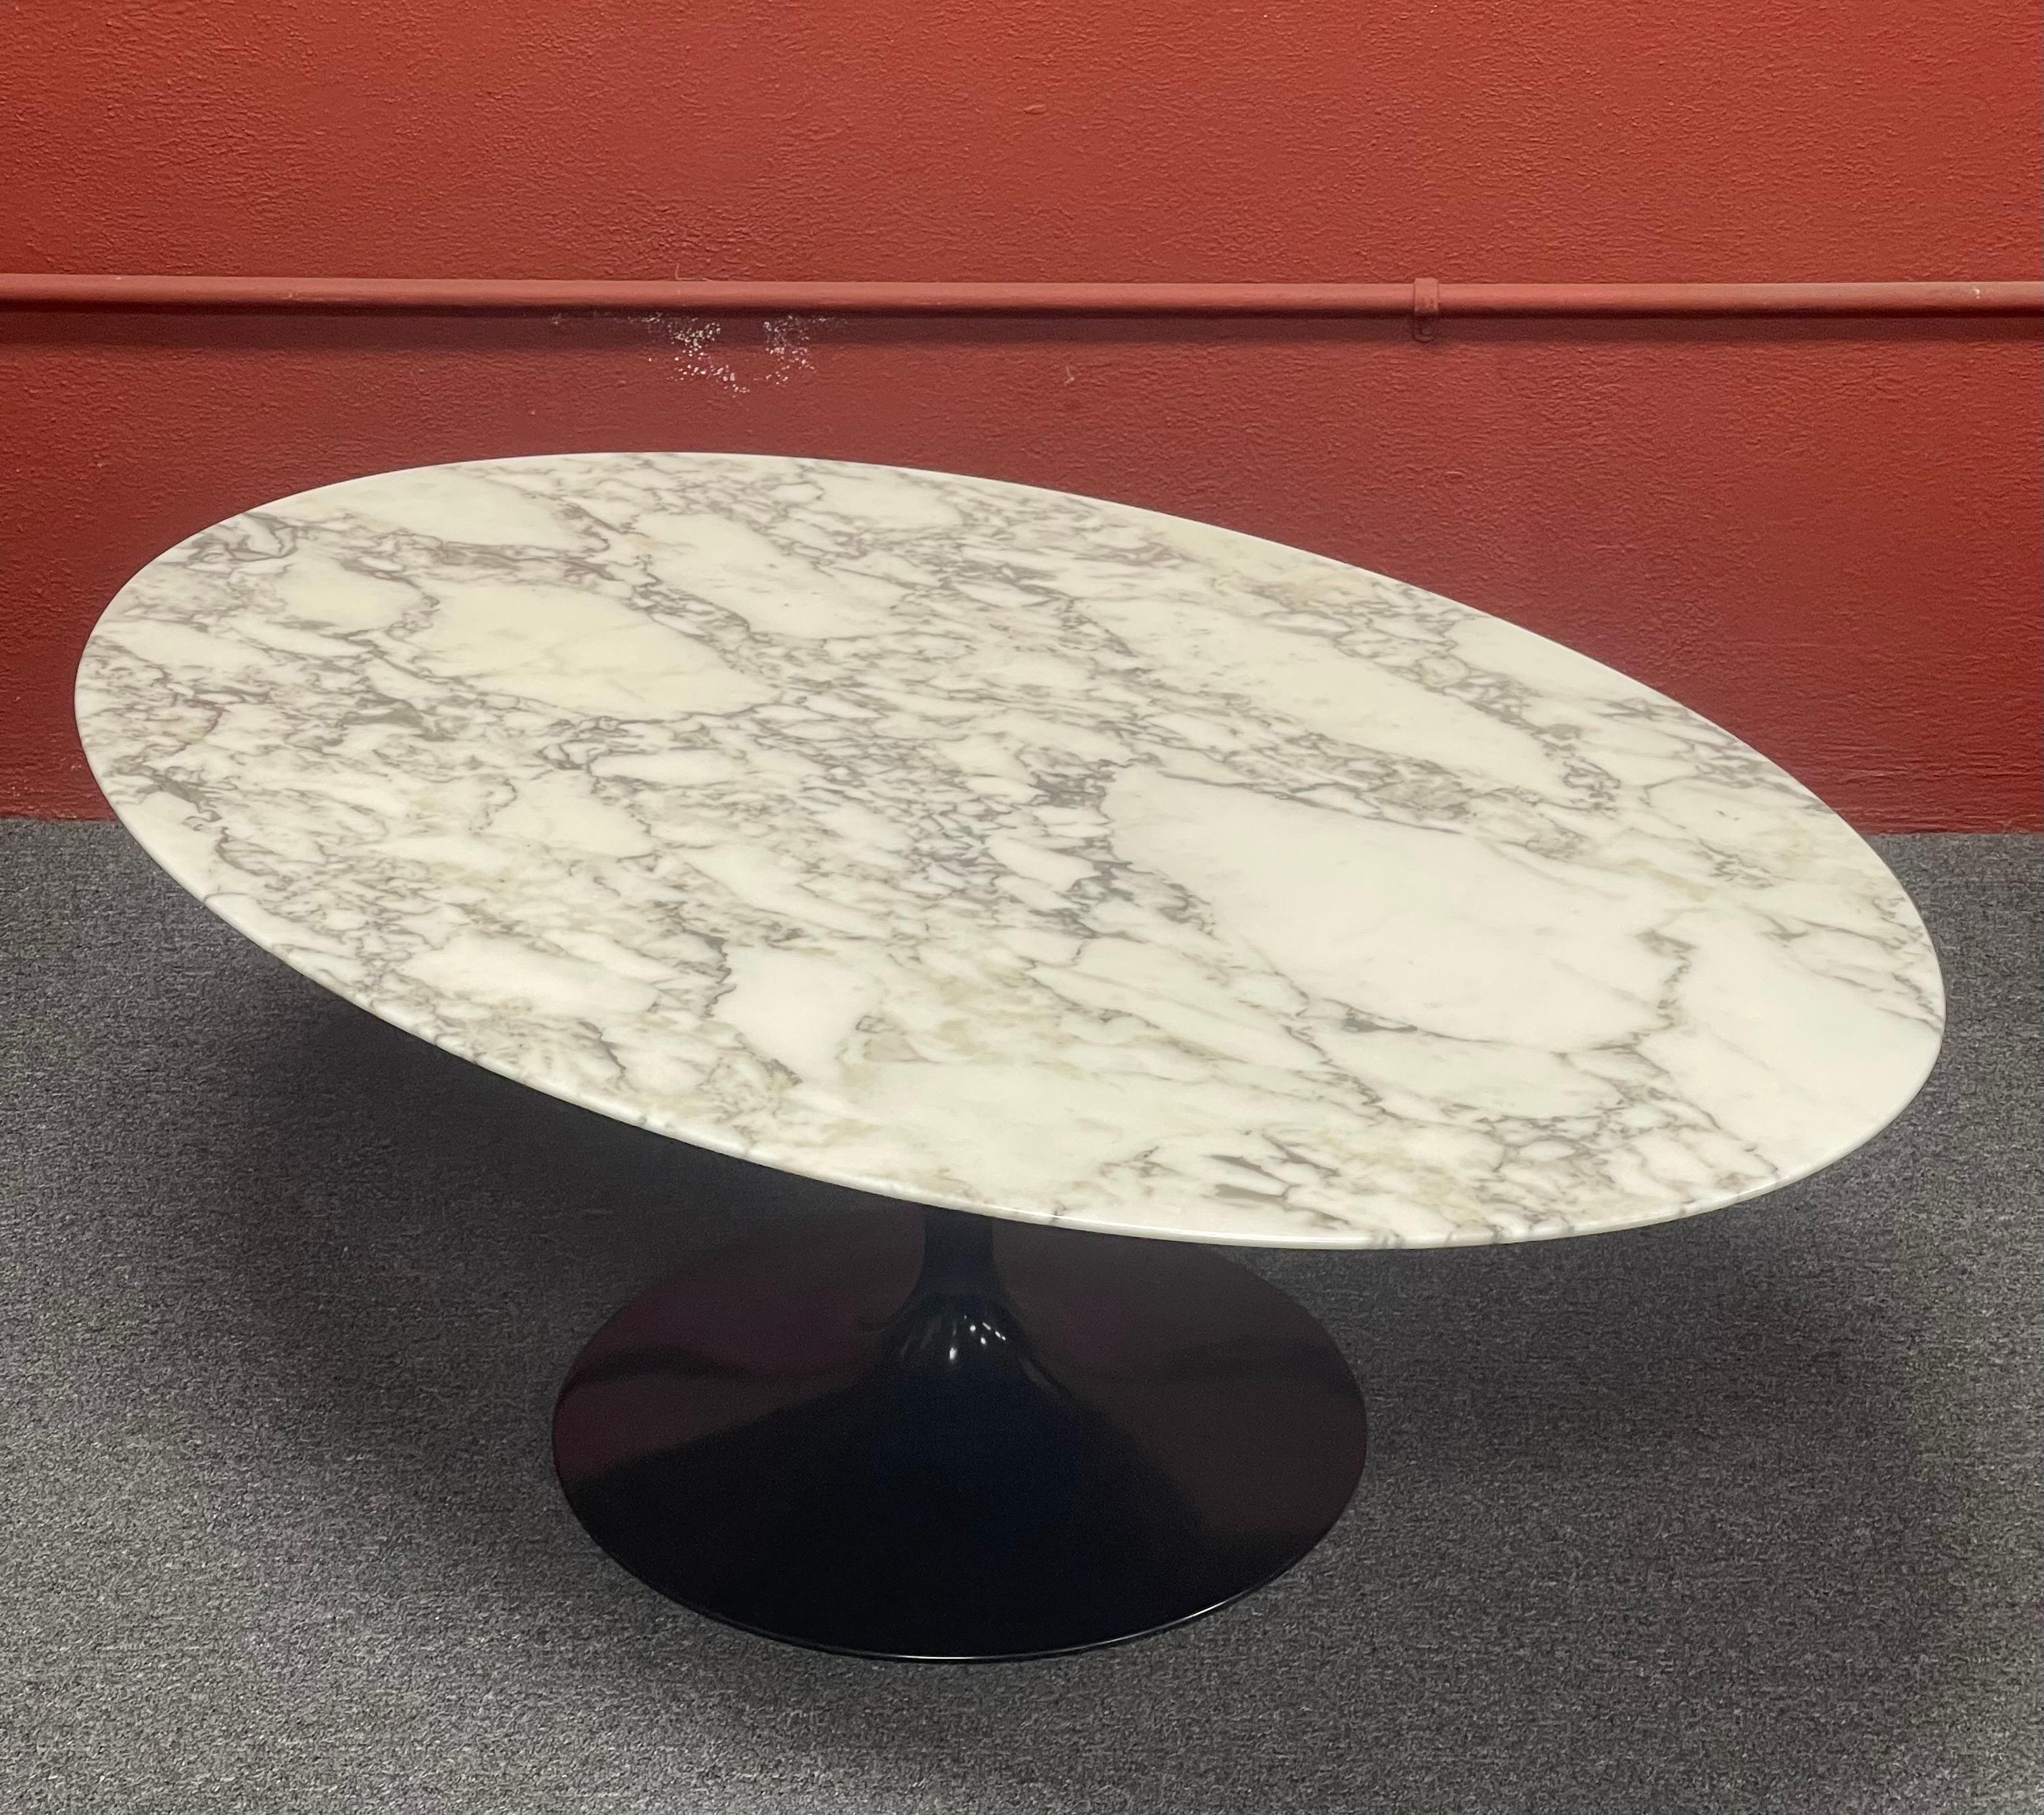 American Authentic Polished Carrara Marble Top Coffee Table by Eero Saarinen for Knoll